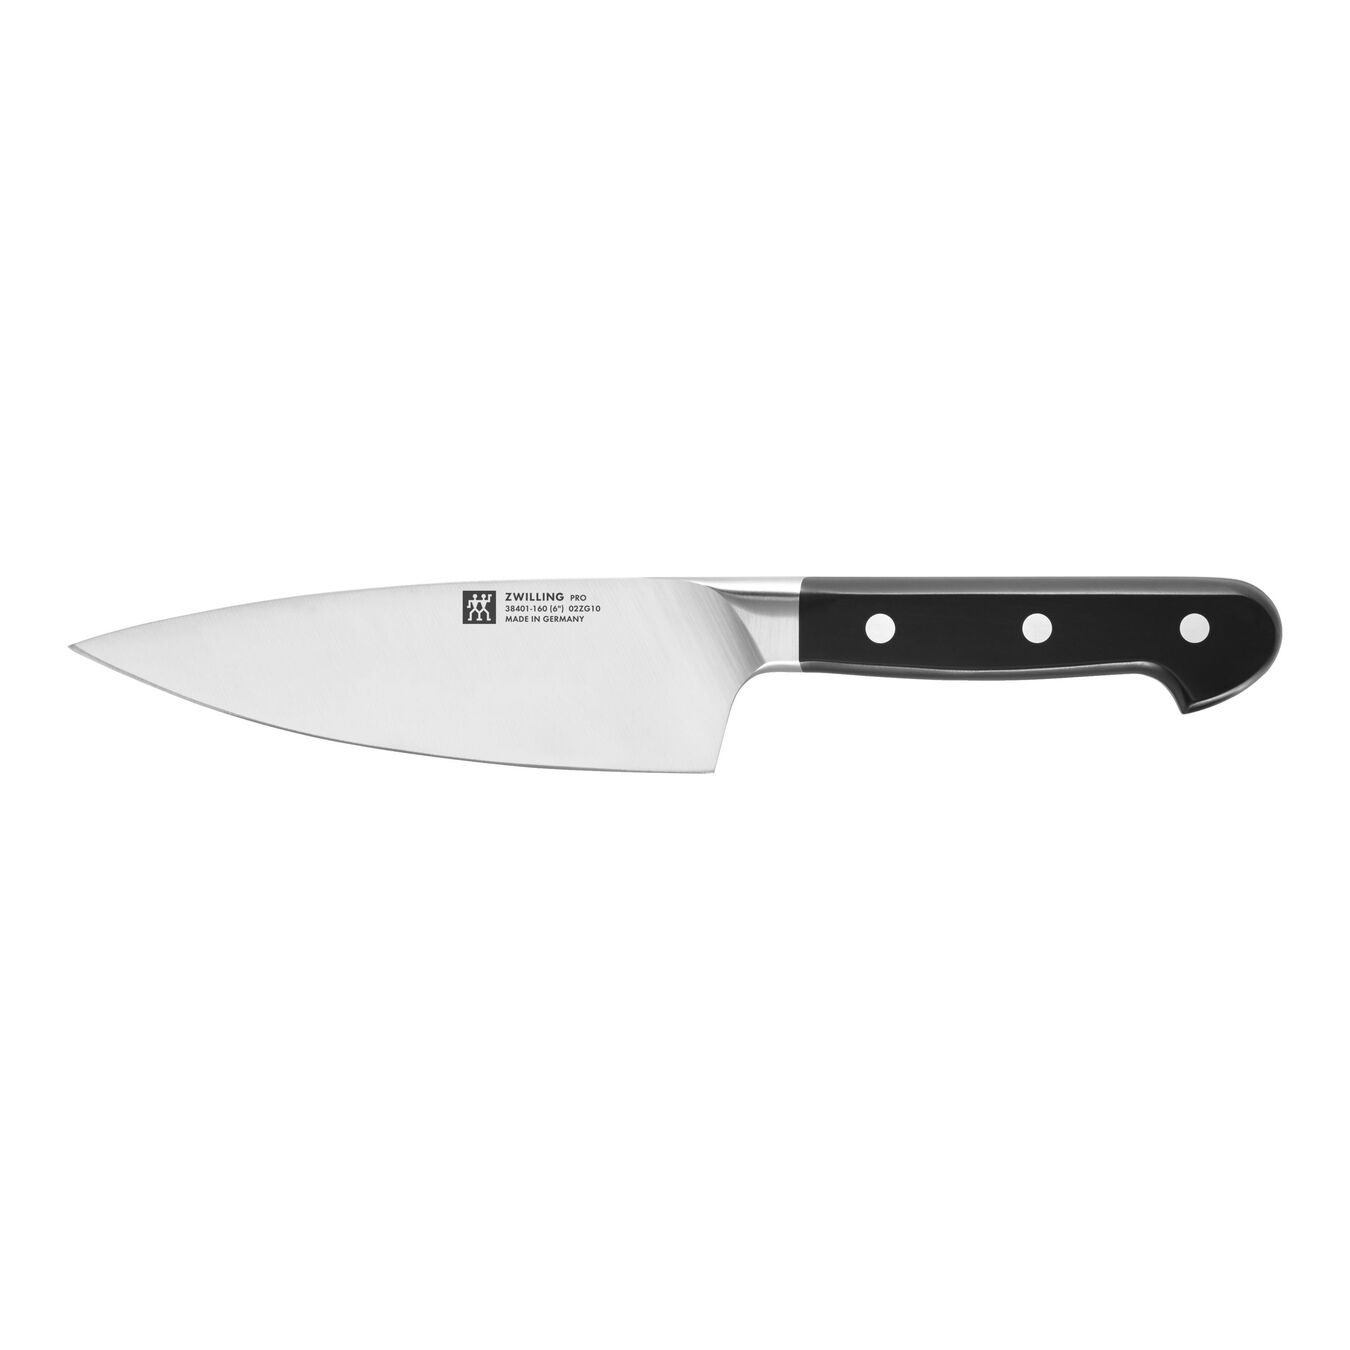 6-inch, Traditional Chef's Knife,,large 1